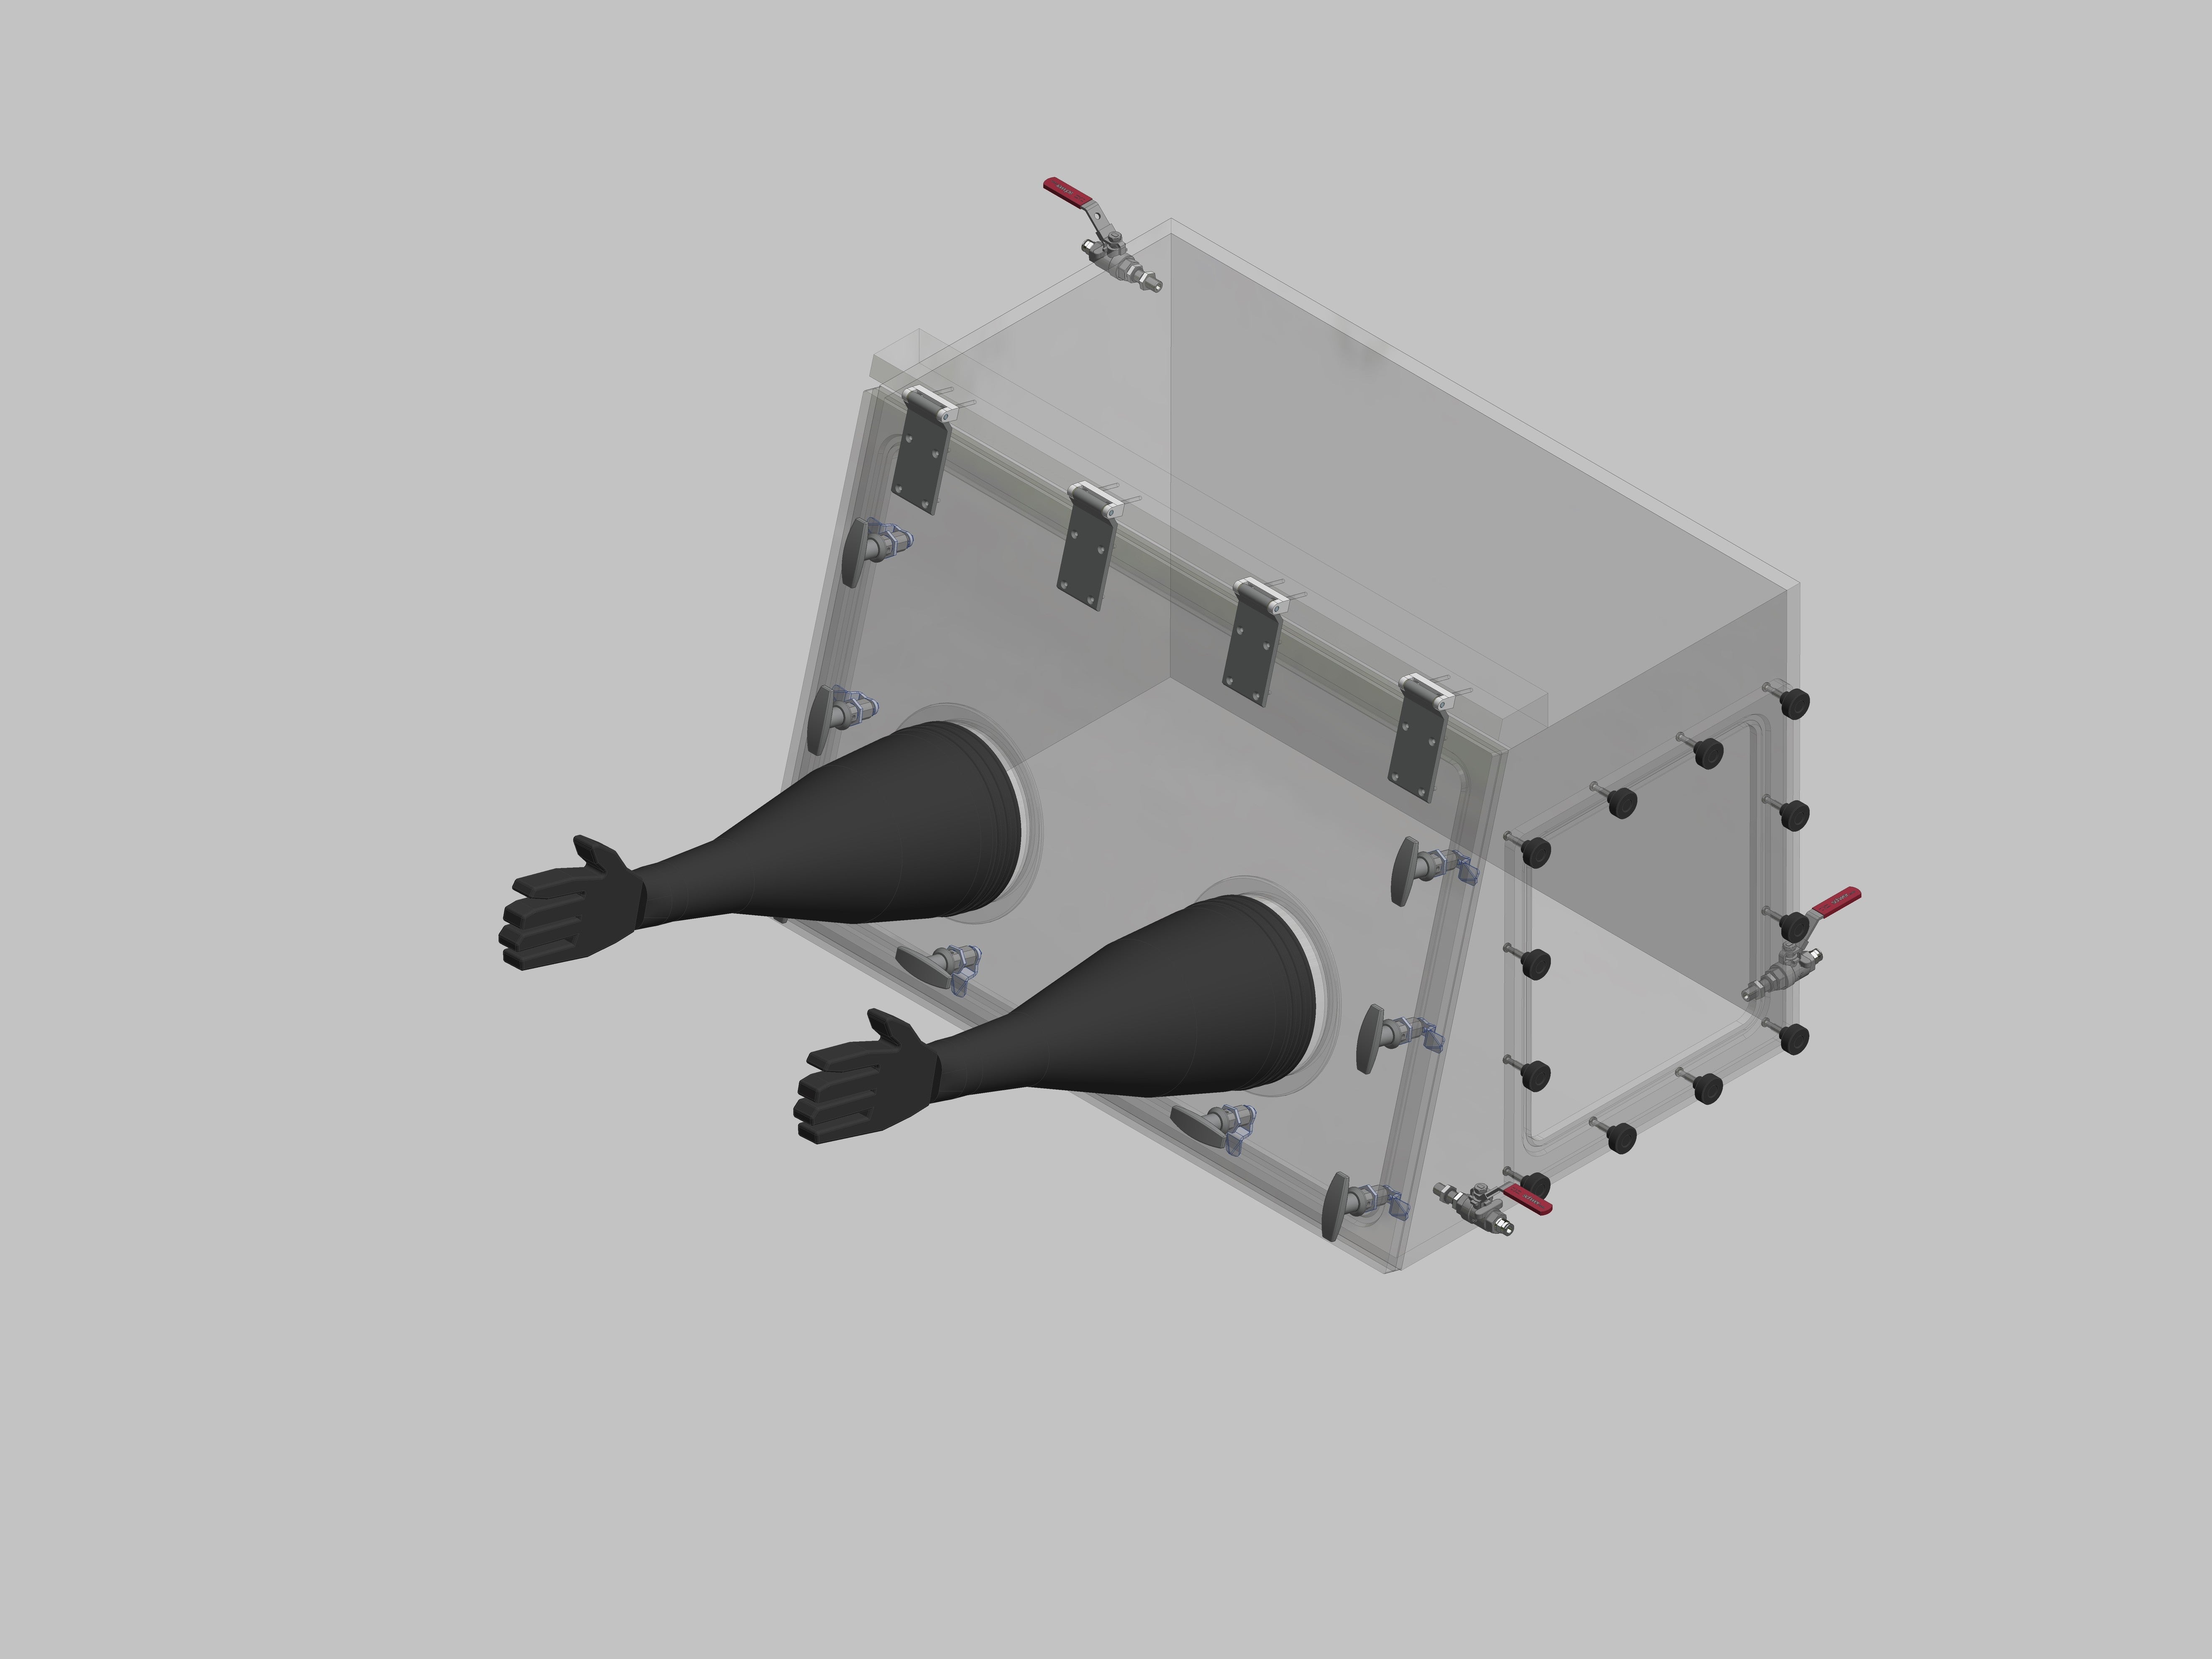 Glovebox made of acrylic &gt; Gas filling: by hand, front design: swivels upwards, side design: removable flange